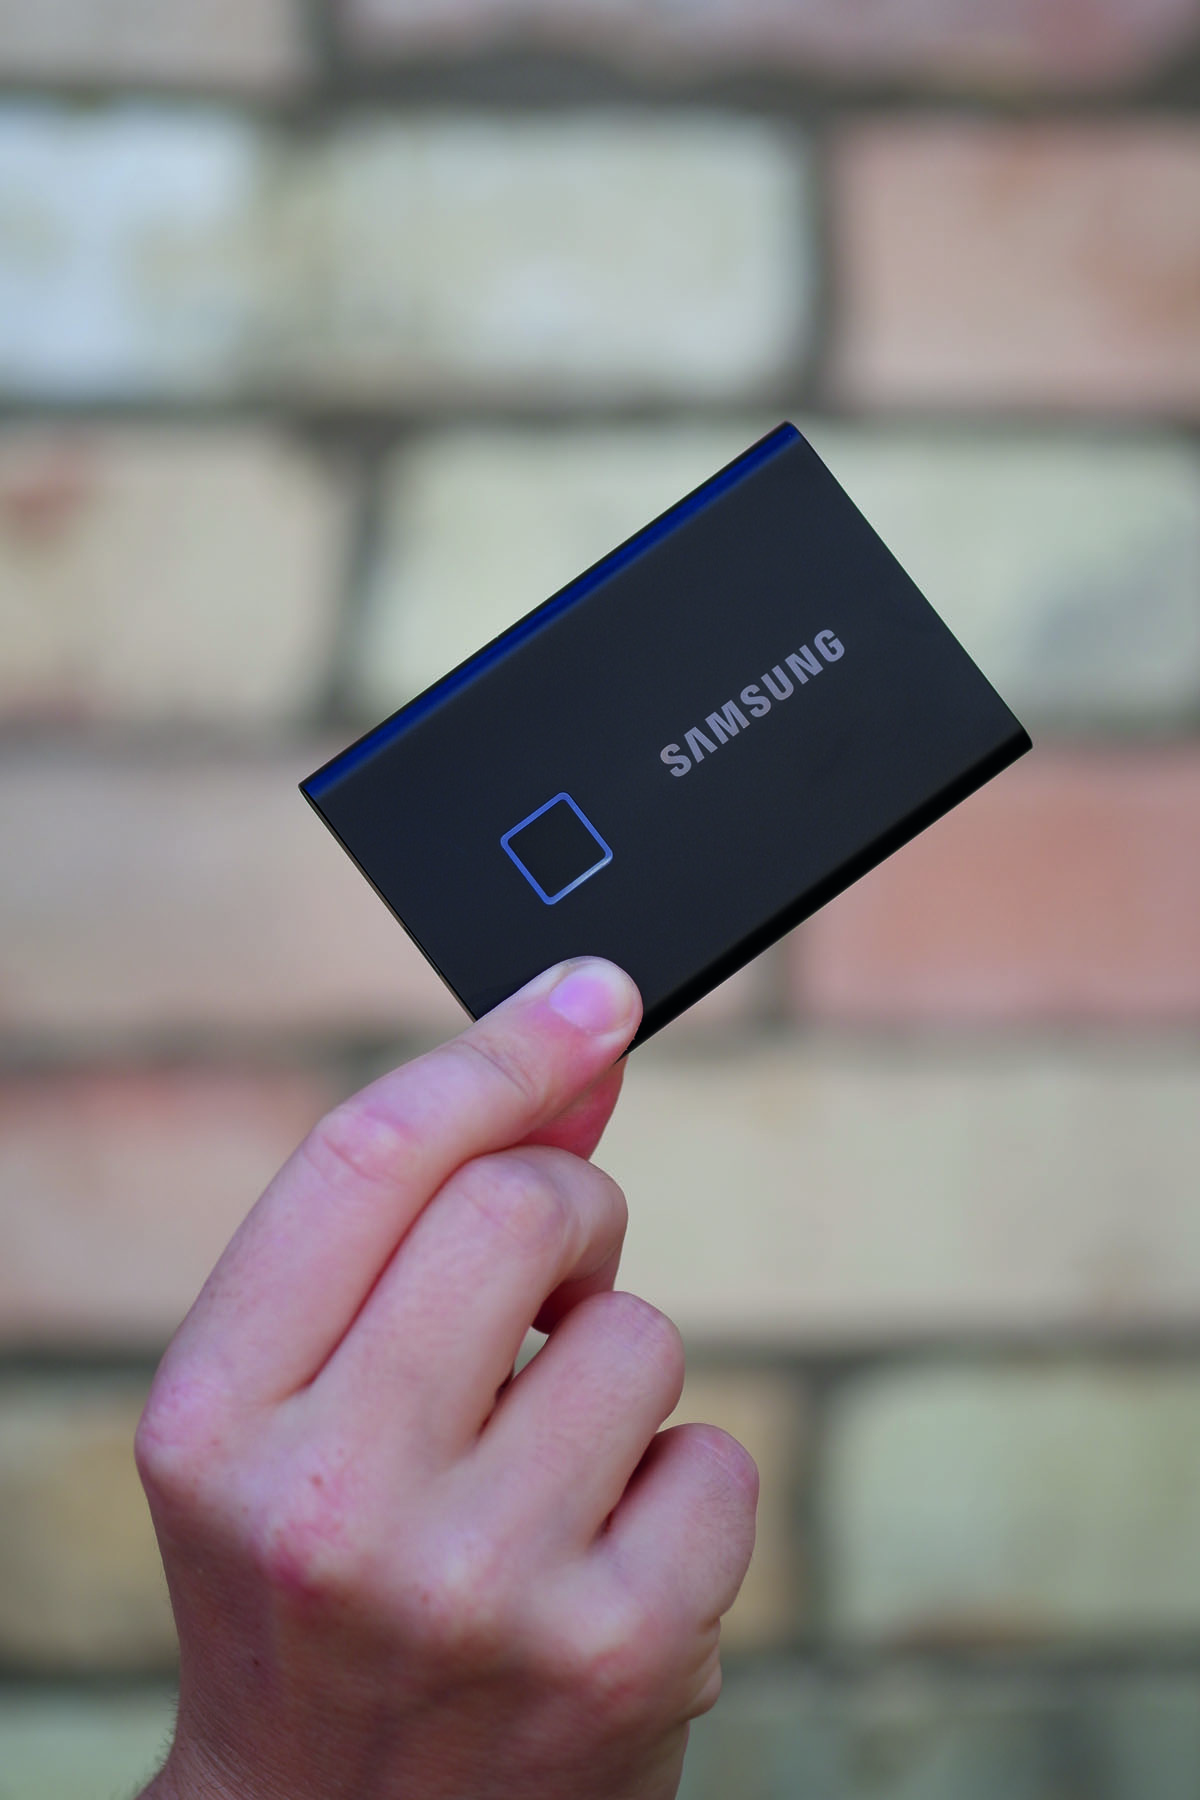 Samsung Portable SSD T7 Touch in man's hand